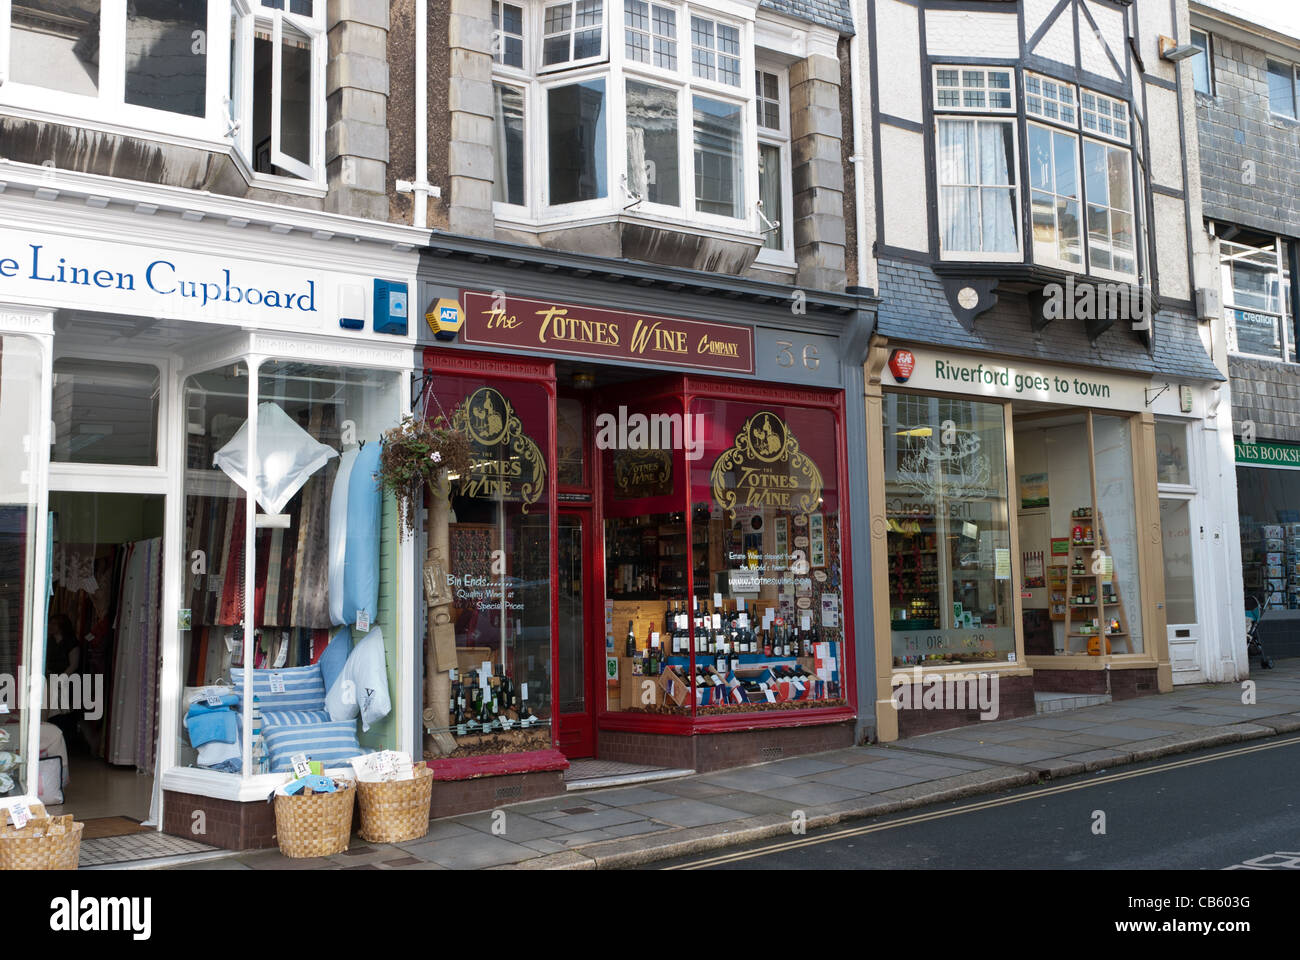 Shops on high street totnes including totnes wine and riverford organics Stock Photo